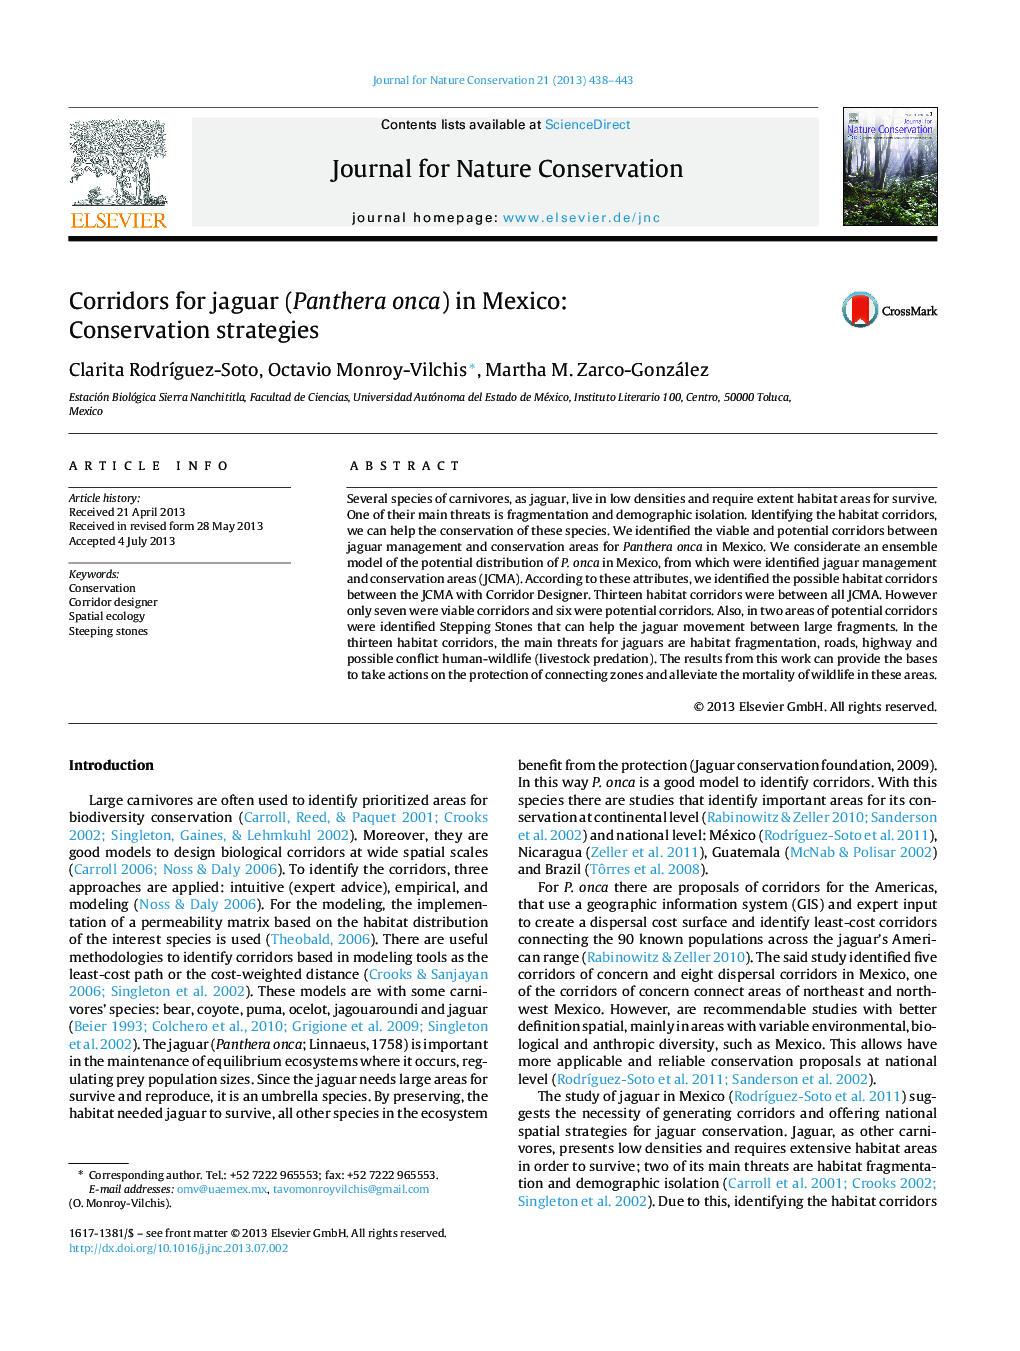 Corridors for jaguar (Panthera onca) in Mexico: Conservation strategies